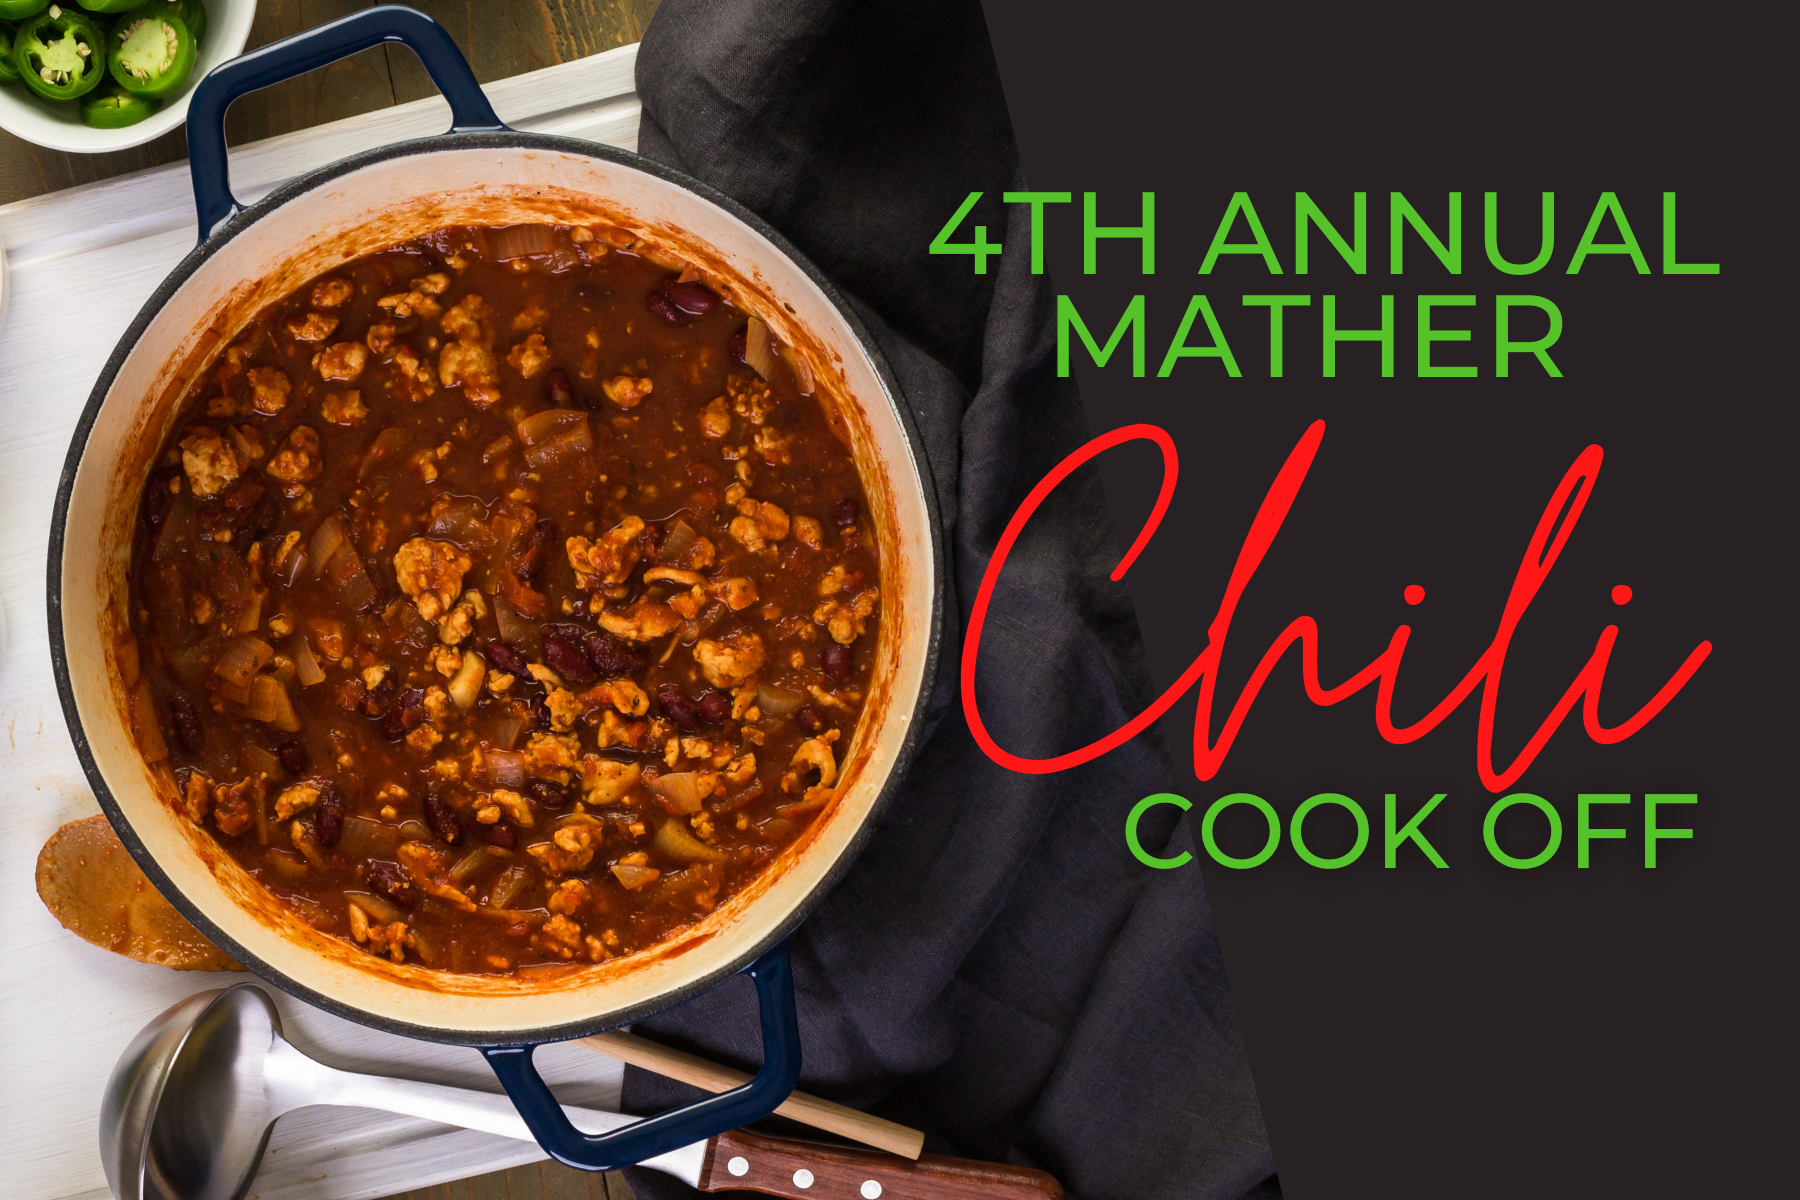 Mather Chili Cook Off 6 x 4 in